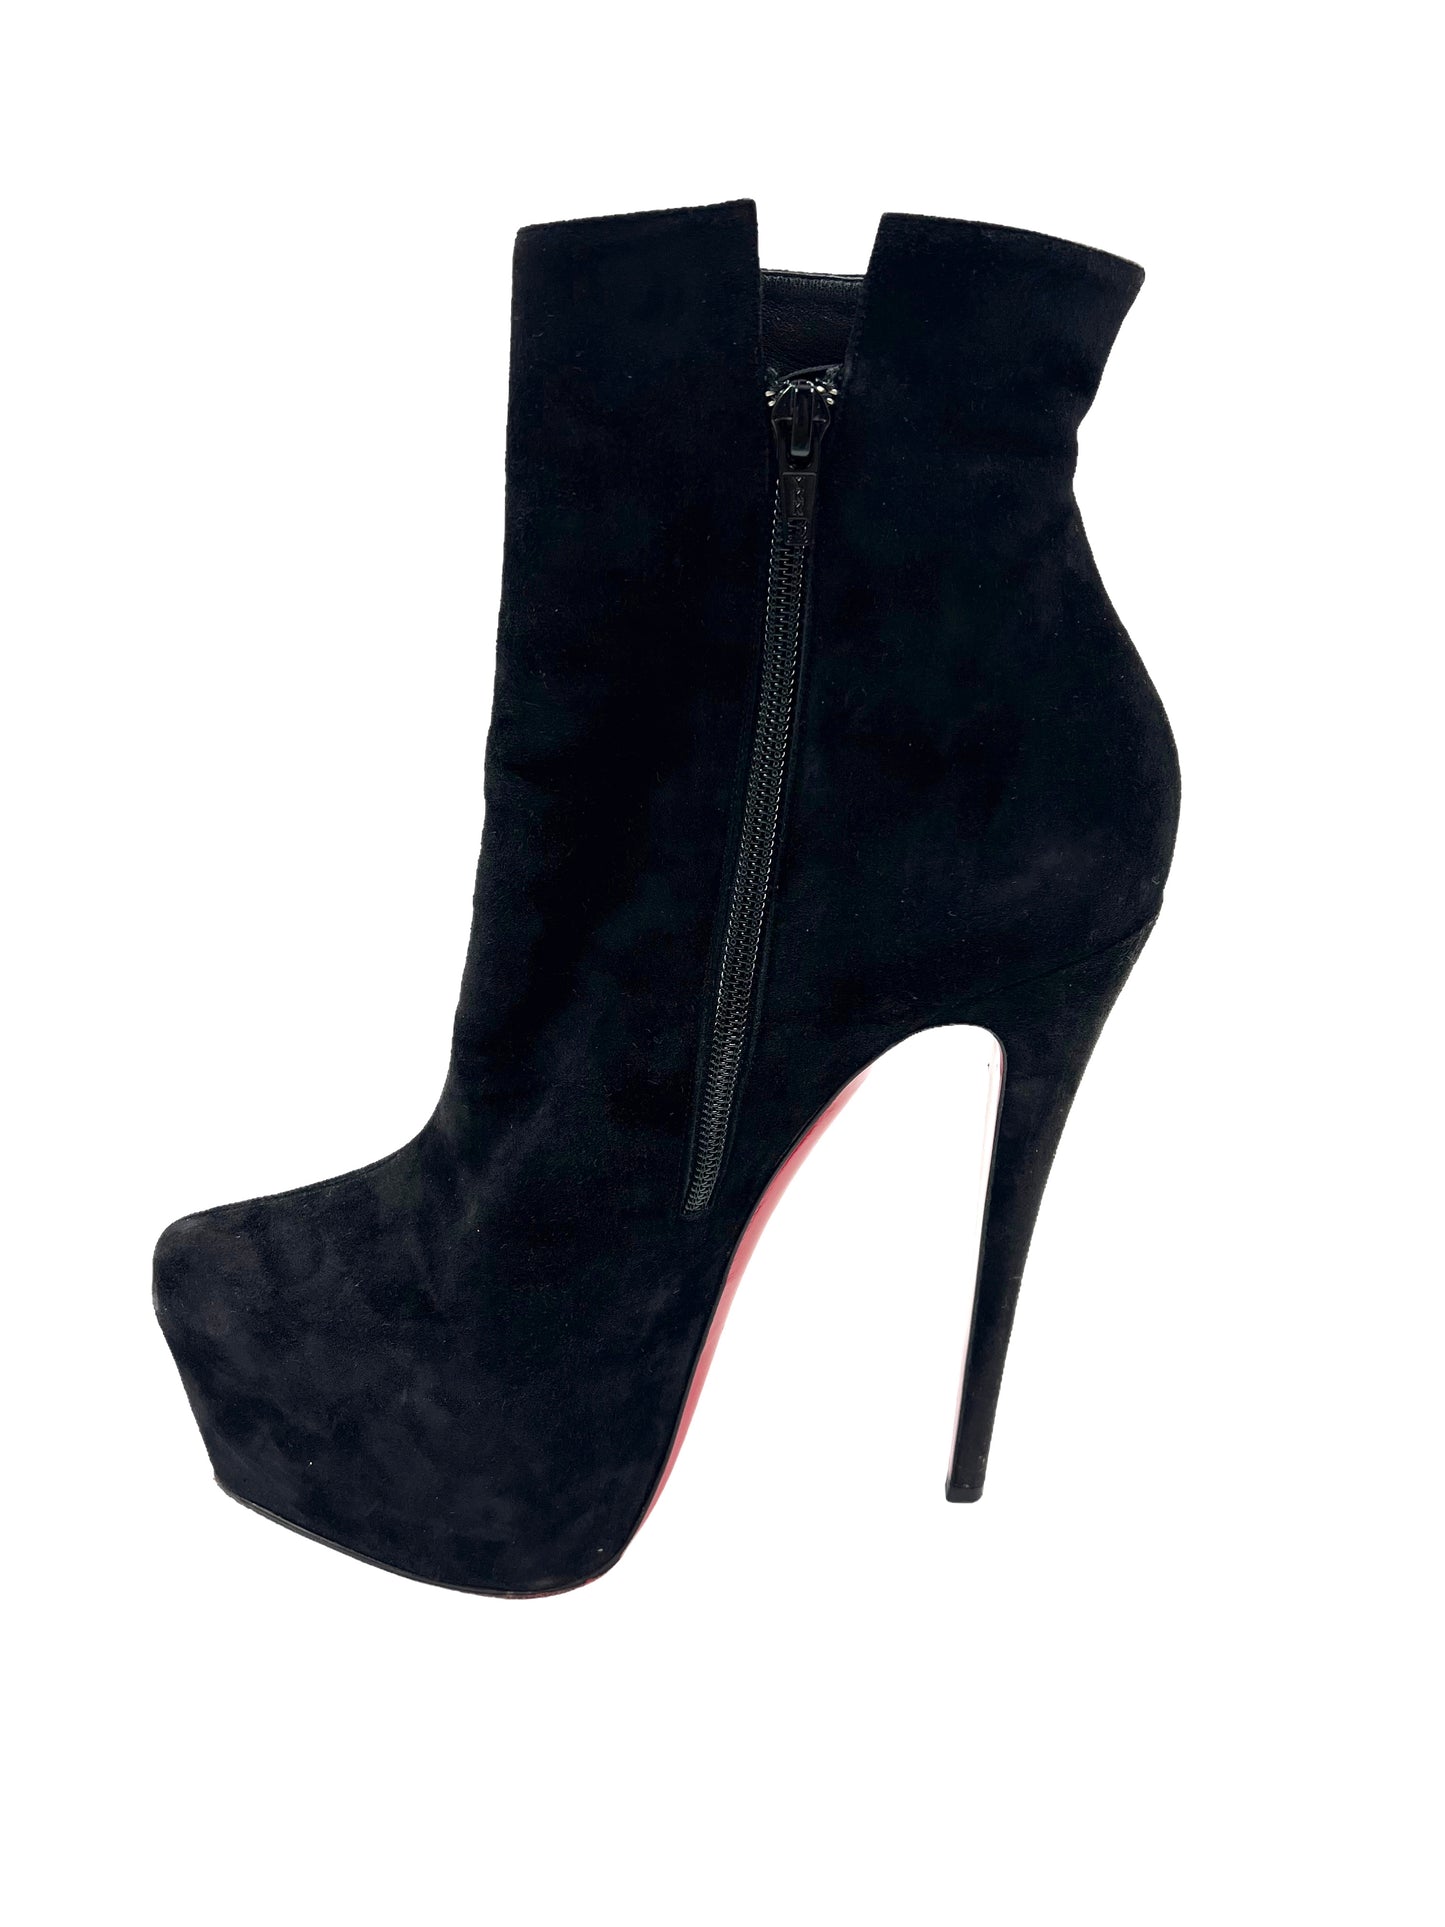 Christian Louboutin Size 40 Black Suede Daf Booty 160 Booties